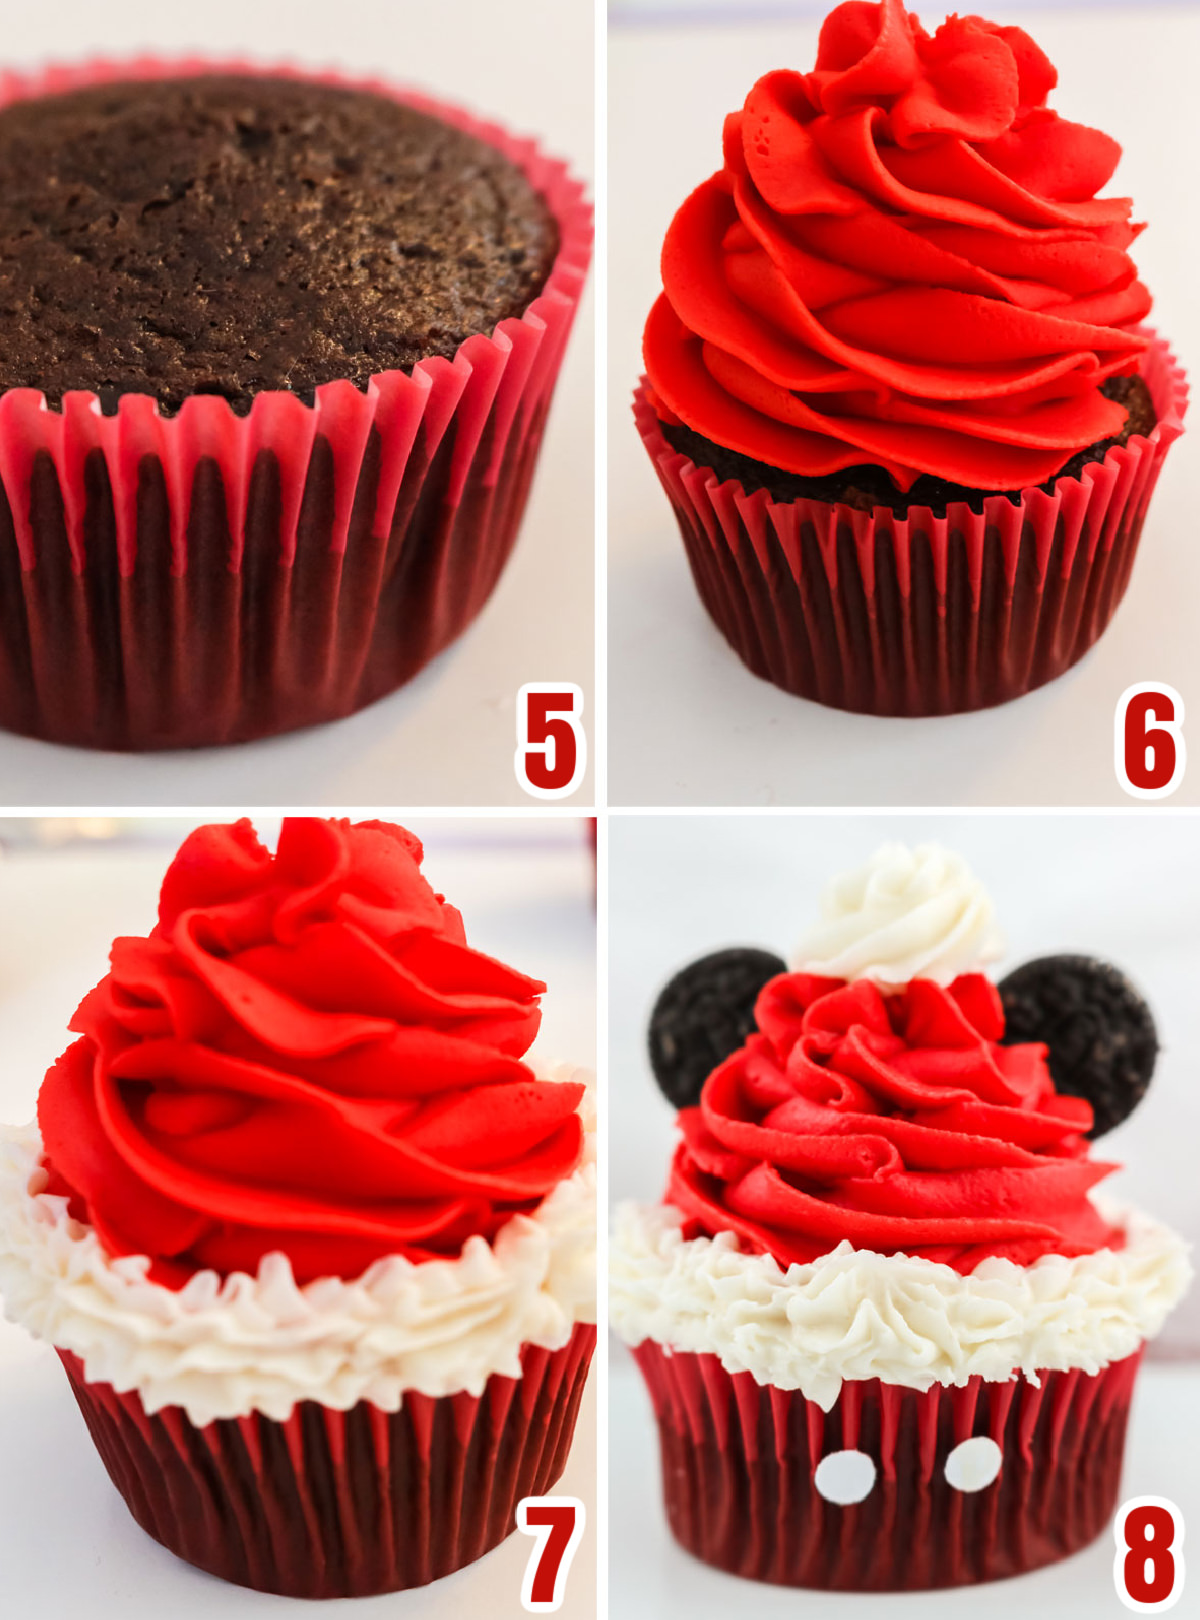 Collage image showing the steps for creating the Santa Hat from red and white frosting.